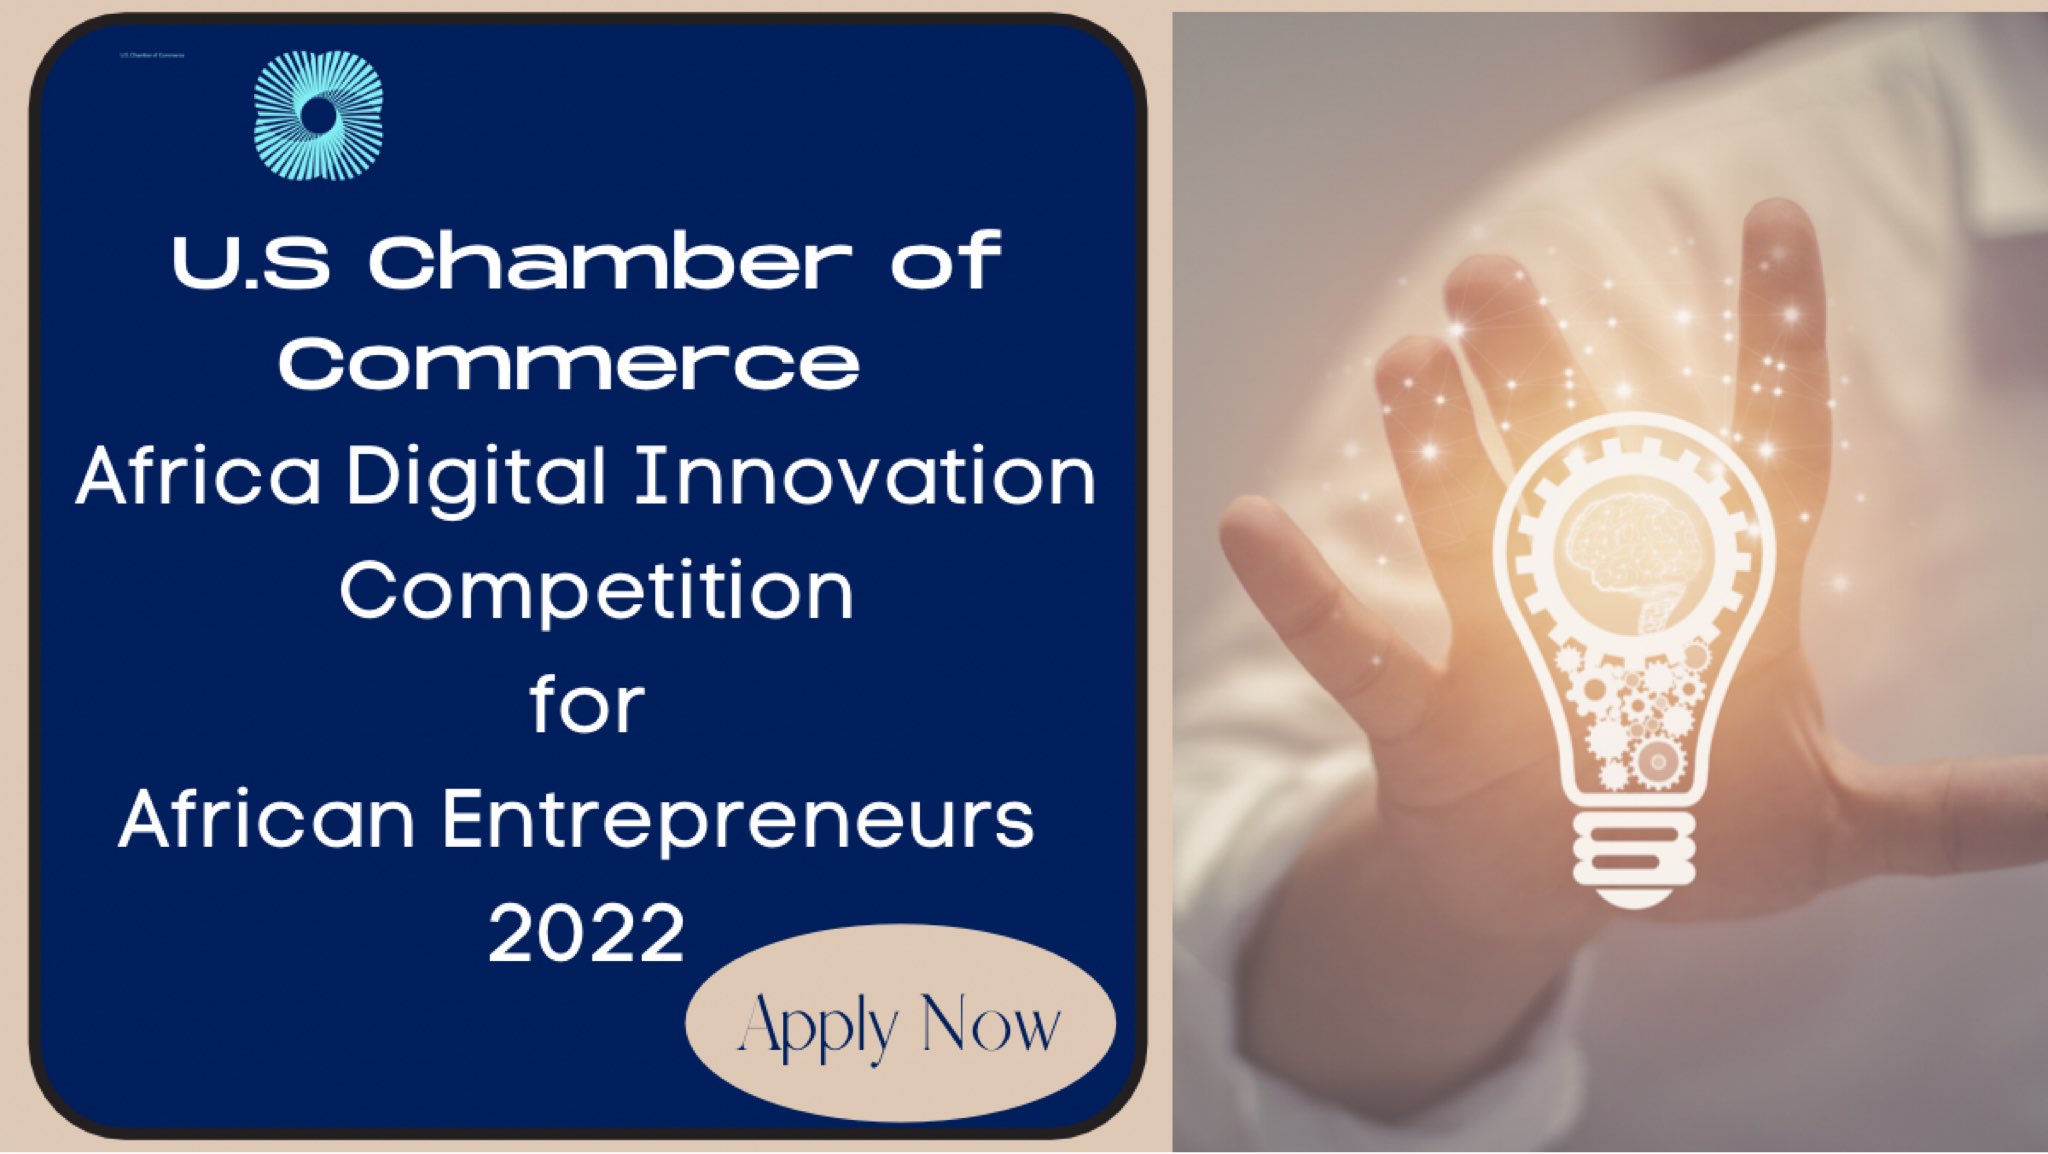 U.S Chamber of Commerce Africa Digital Innovation Competition 2022